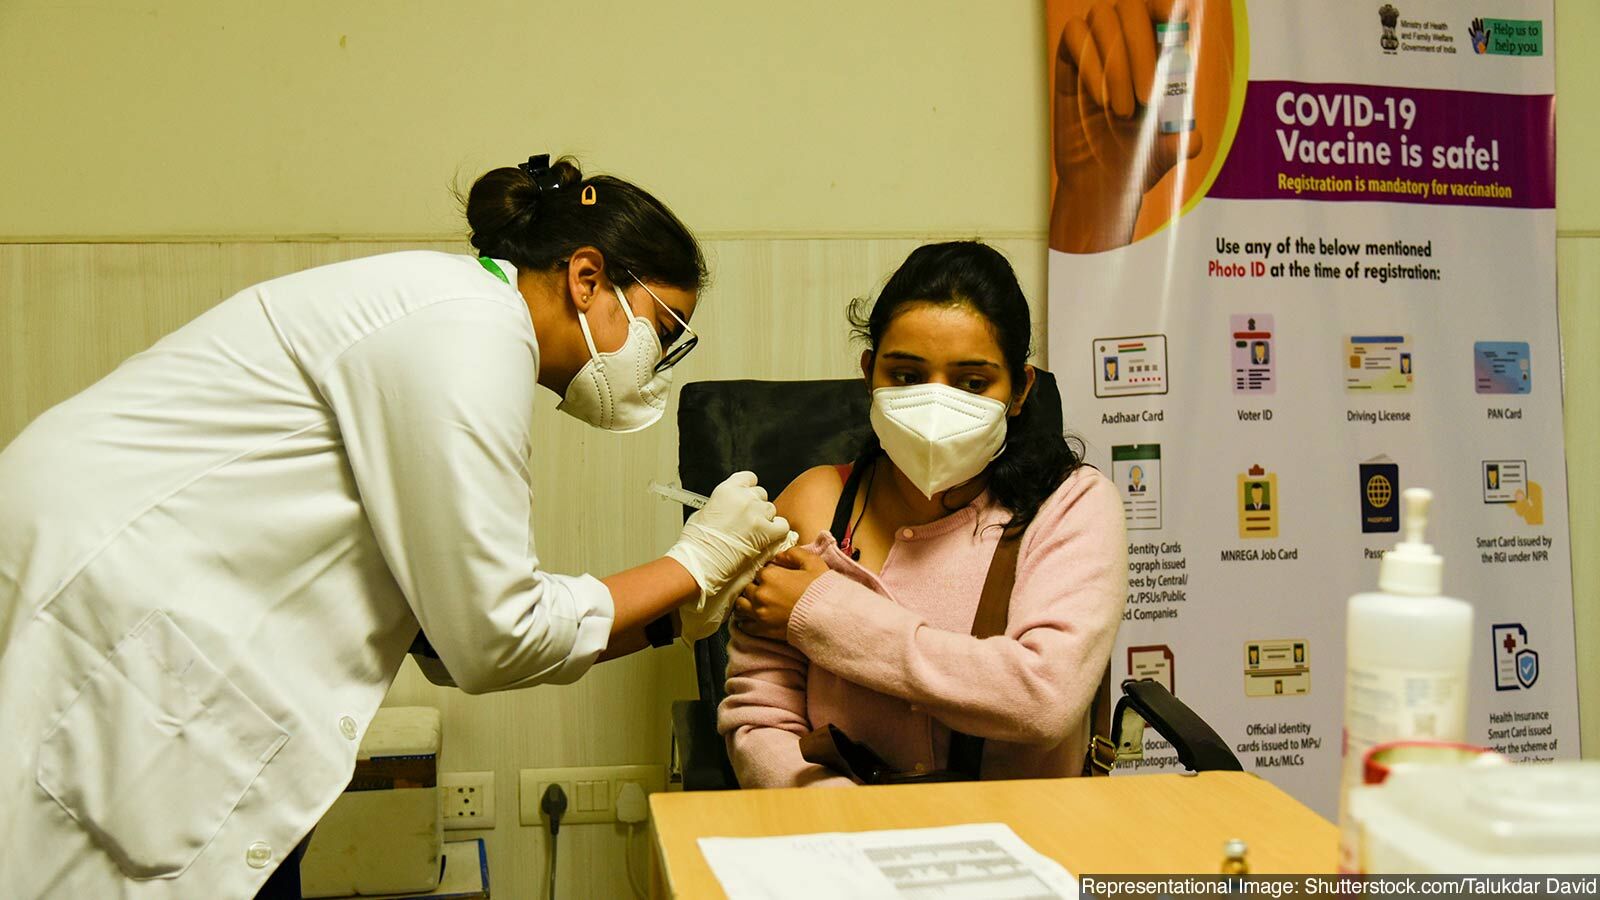 as india ramps up covid-19 vaccinations, data on adverse events are missing